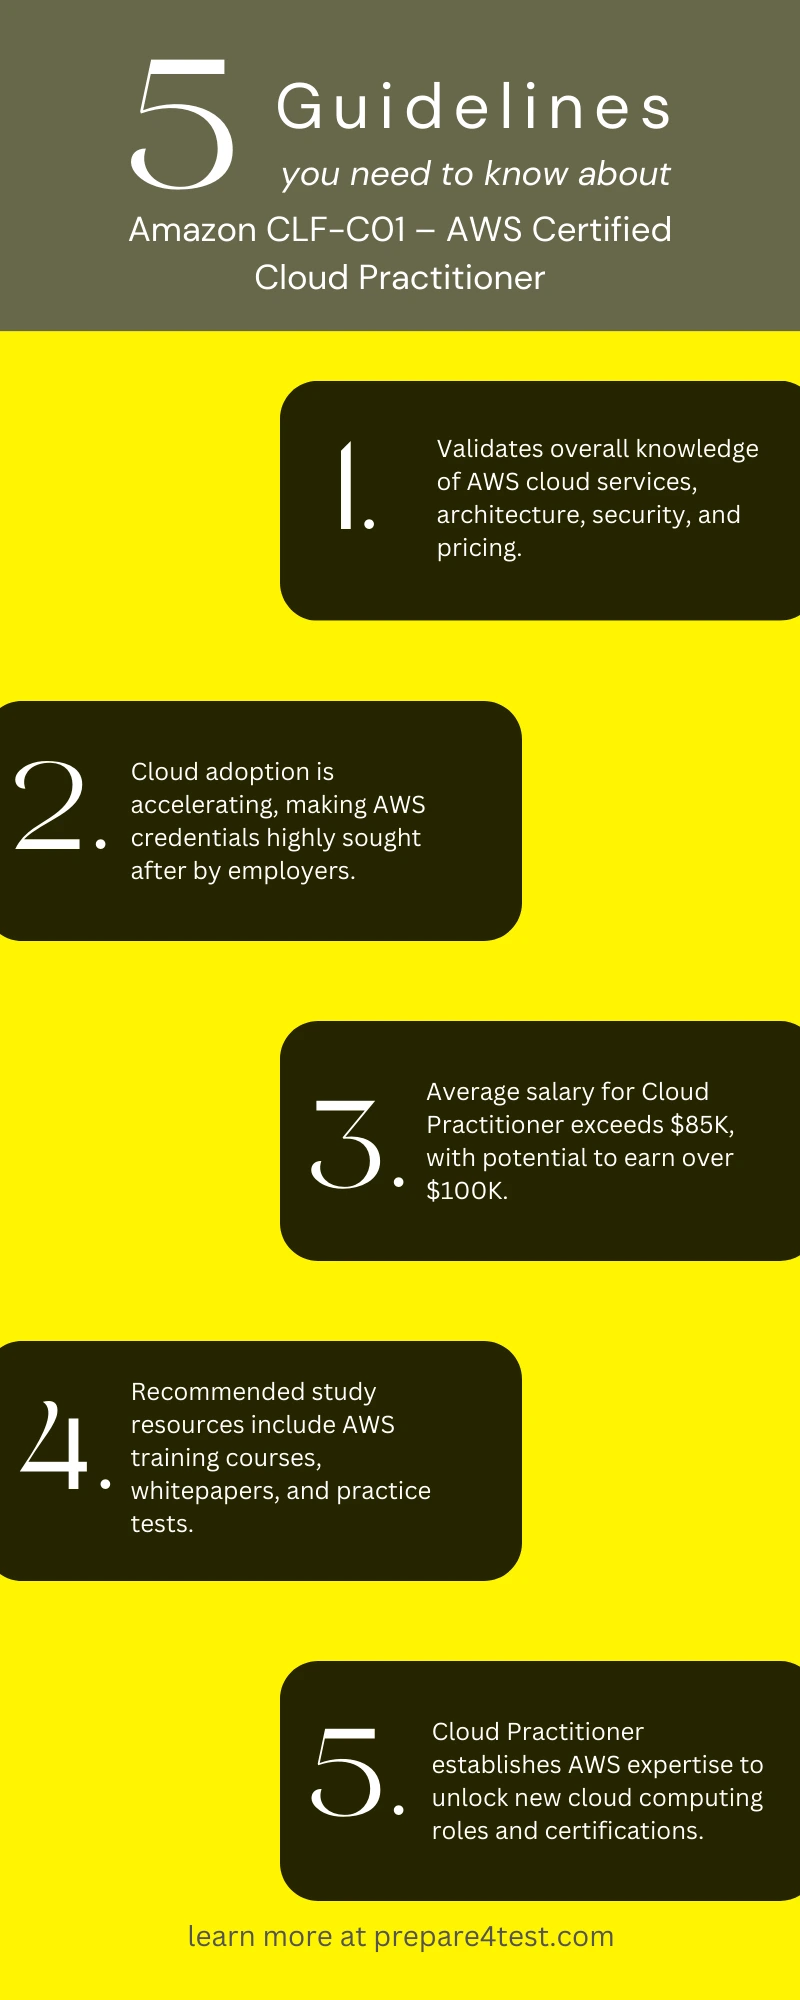 Average Salary For AWS Certified Cloud Practitioner Infographic